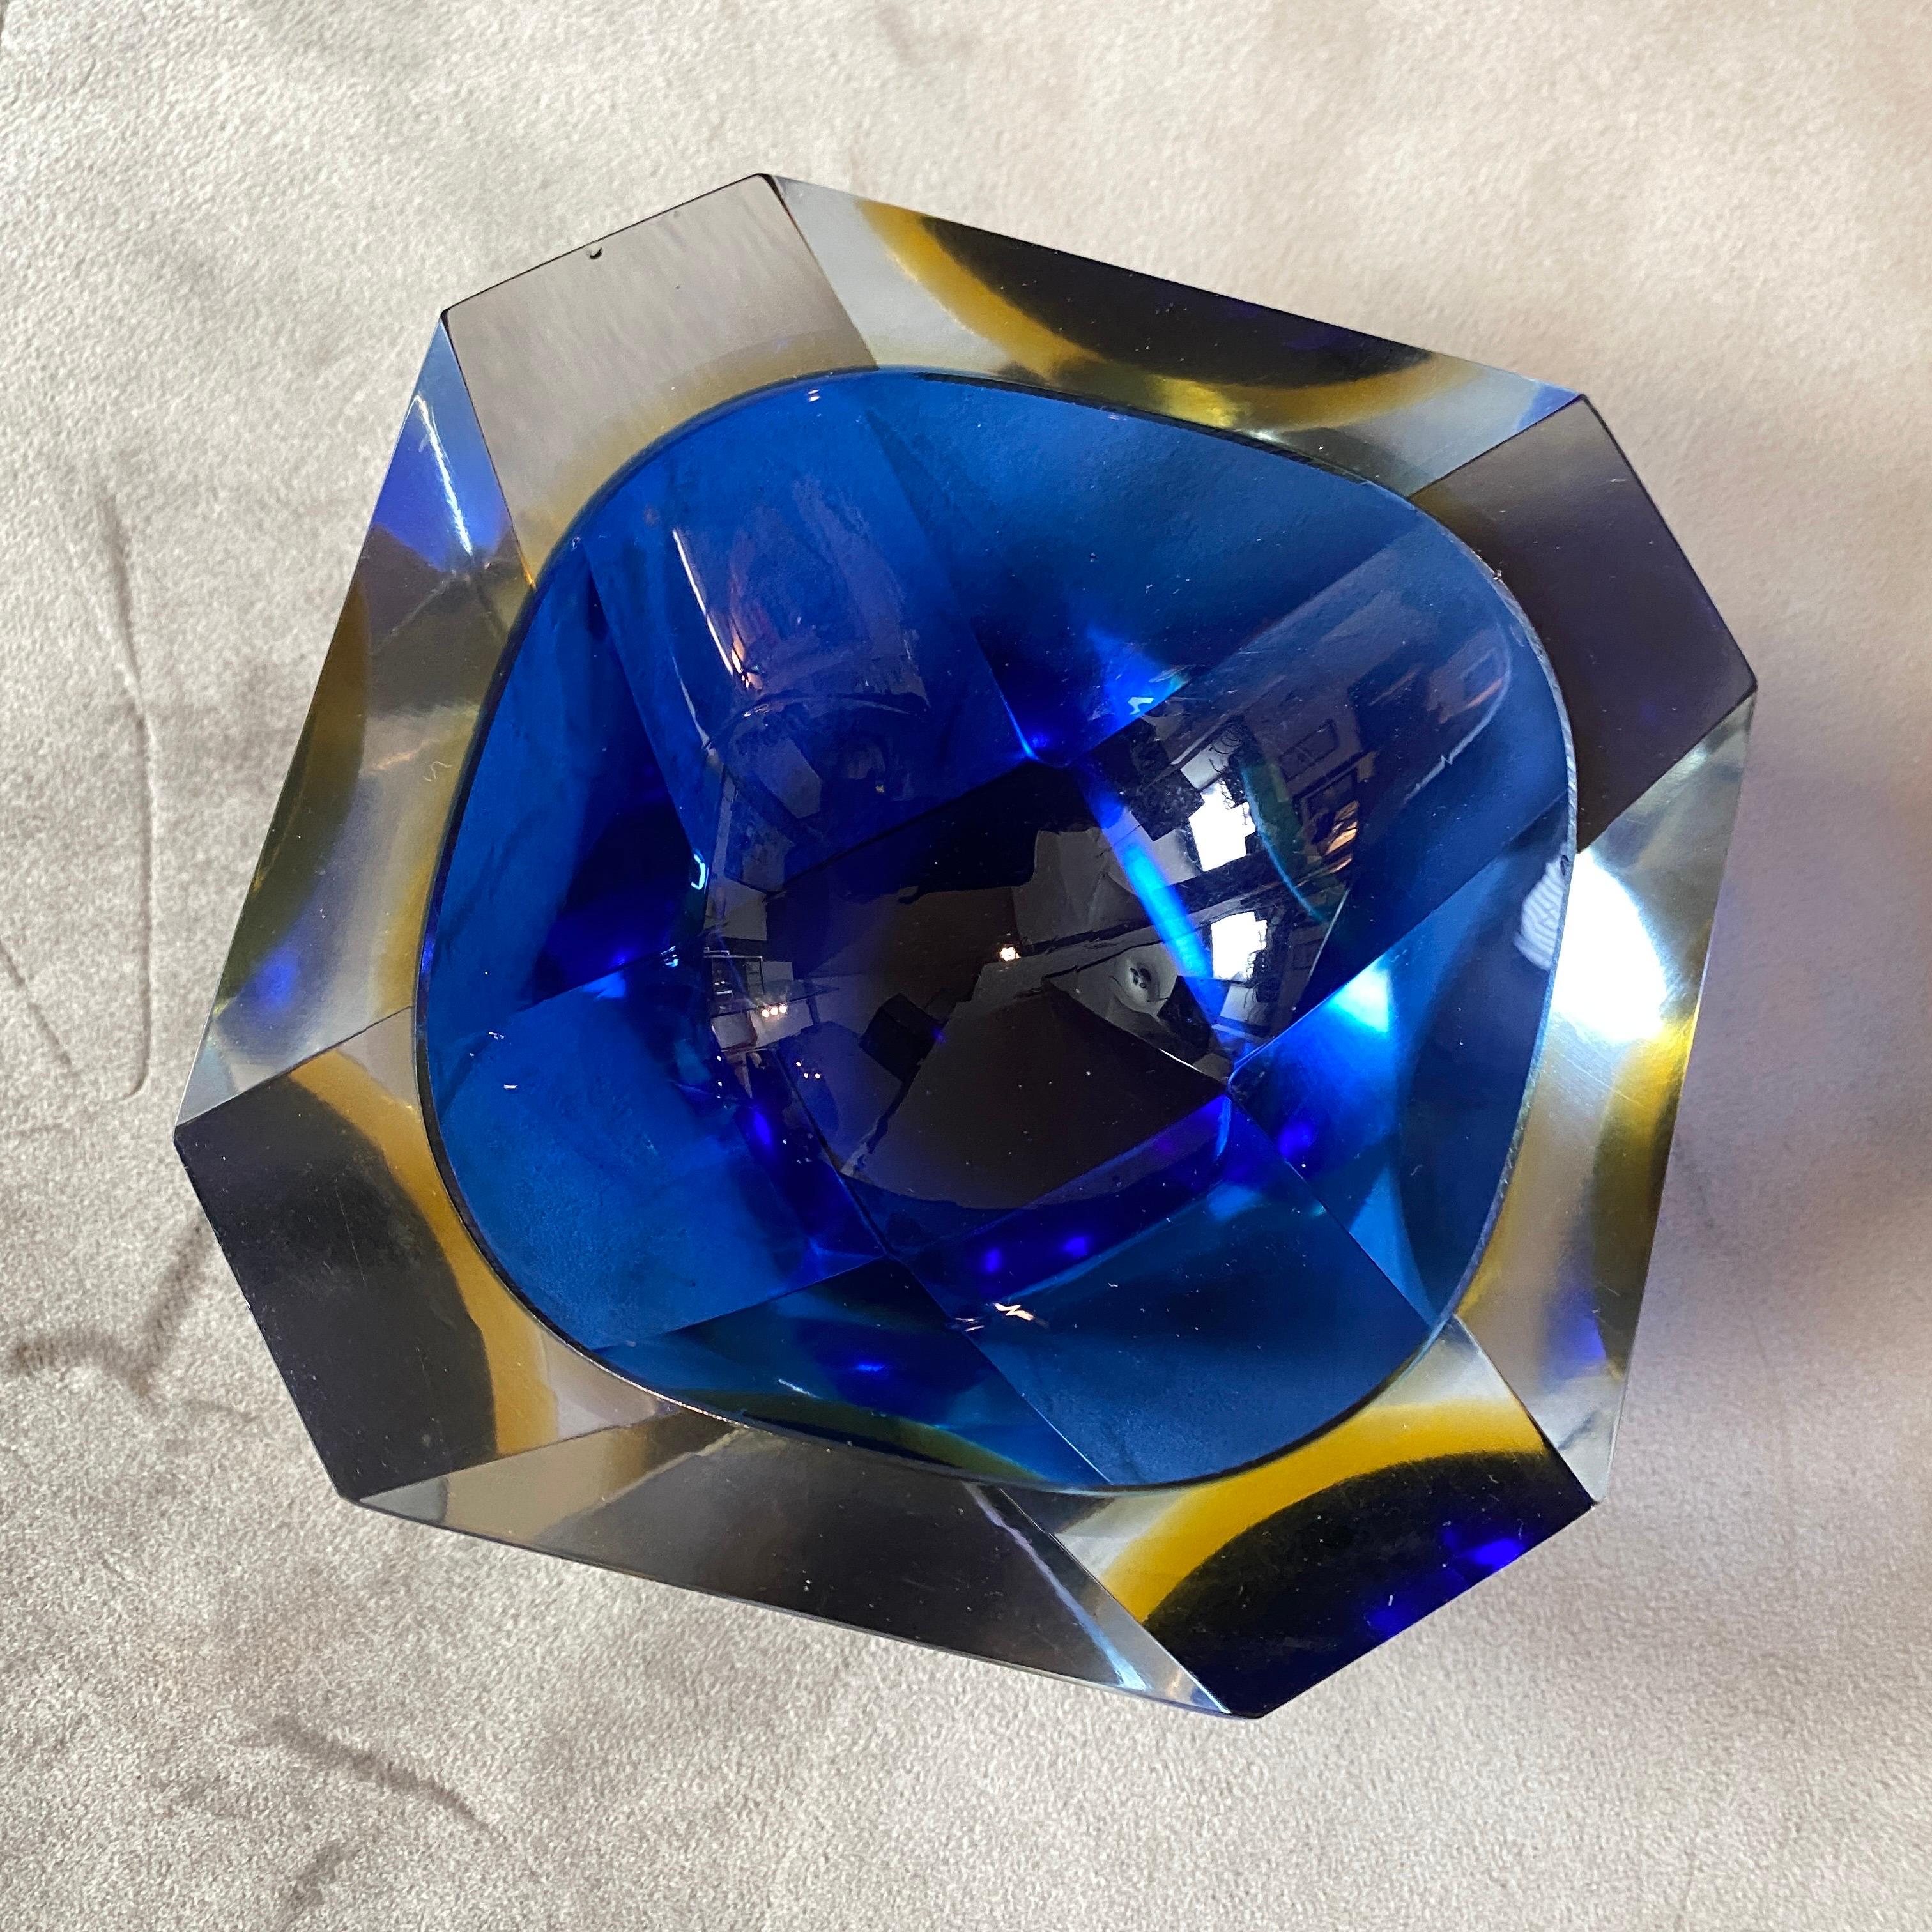 A rare semi faceted murano glass ashtray designed and manufactured by Seguso, it's in perfect conditions. Crafted with precision and artistry, the ashtray boasts a multifaceted surface that catches and reflects light, adding depth and dimension to